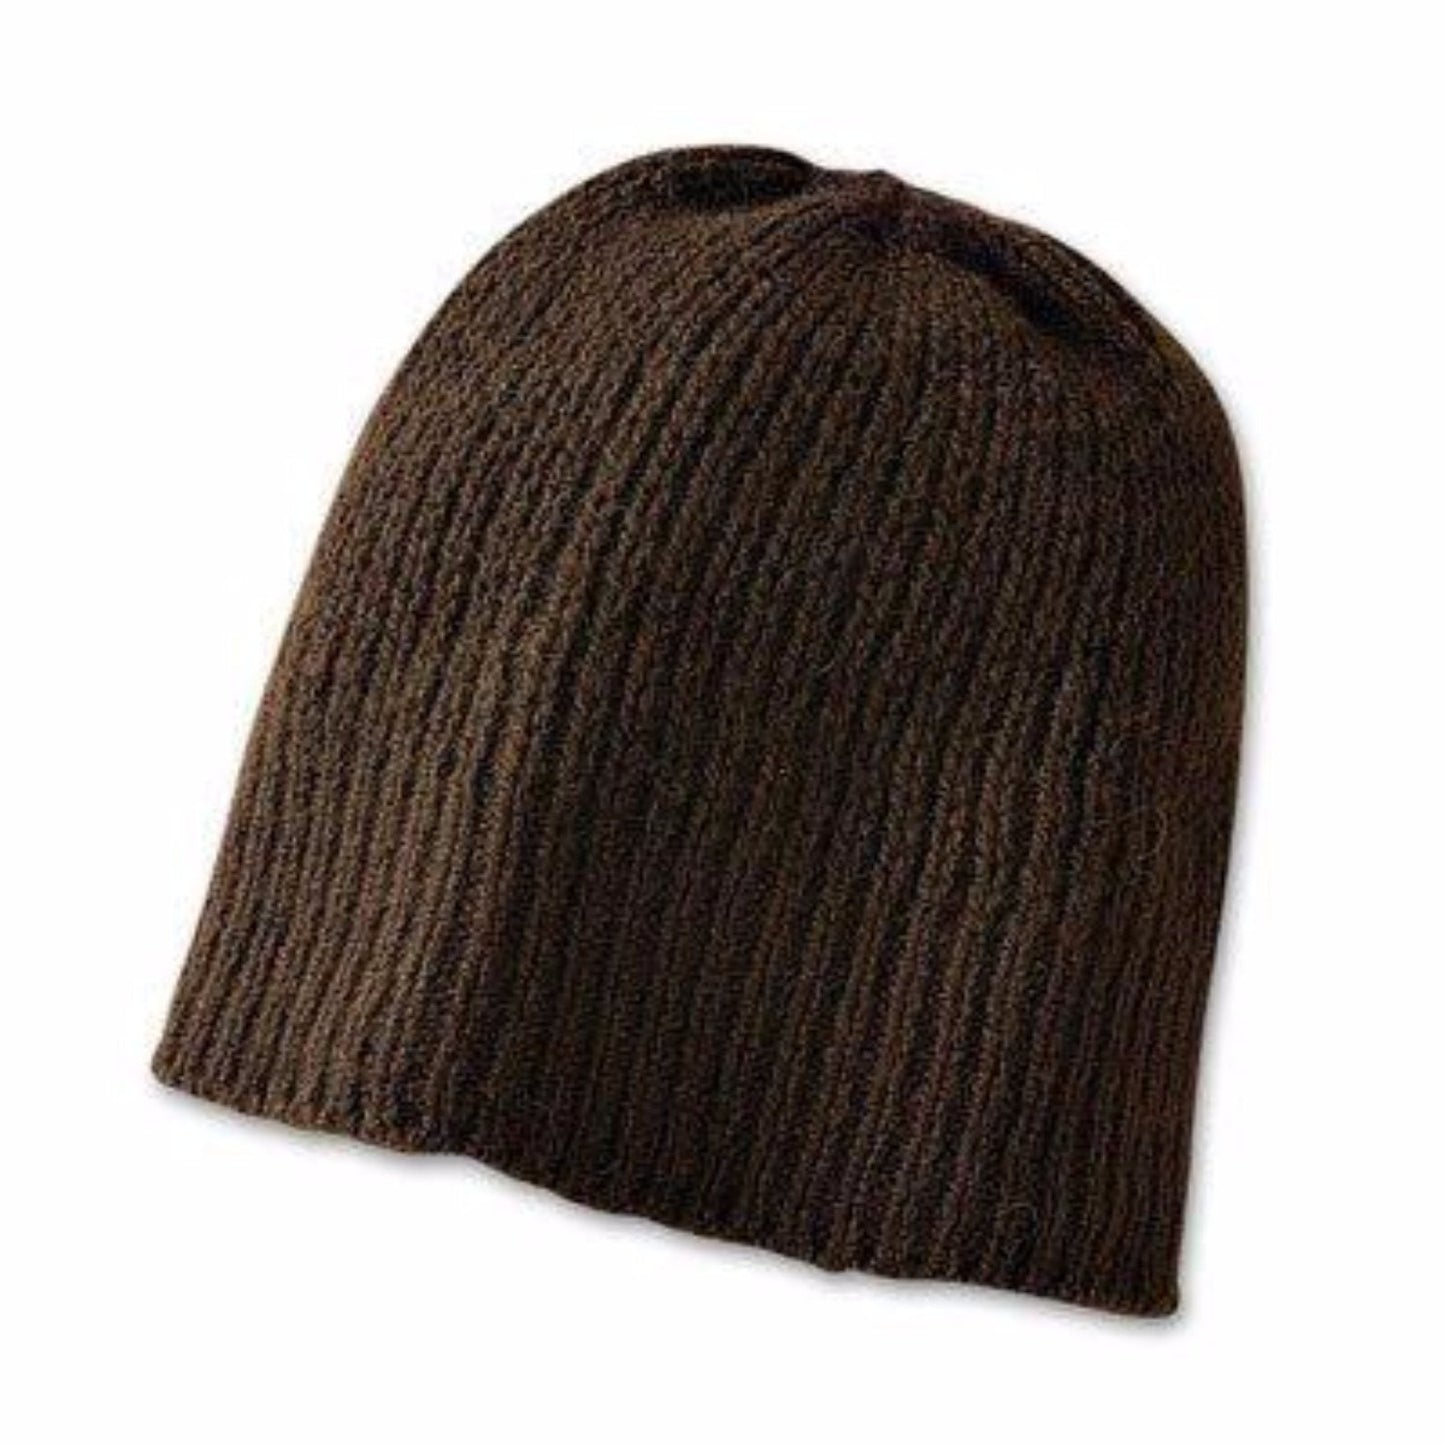 Ribbed Bison Beanie